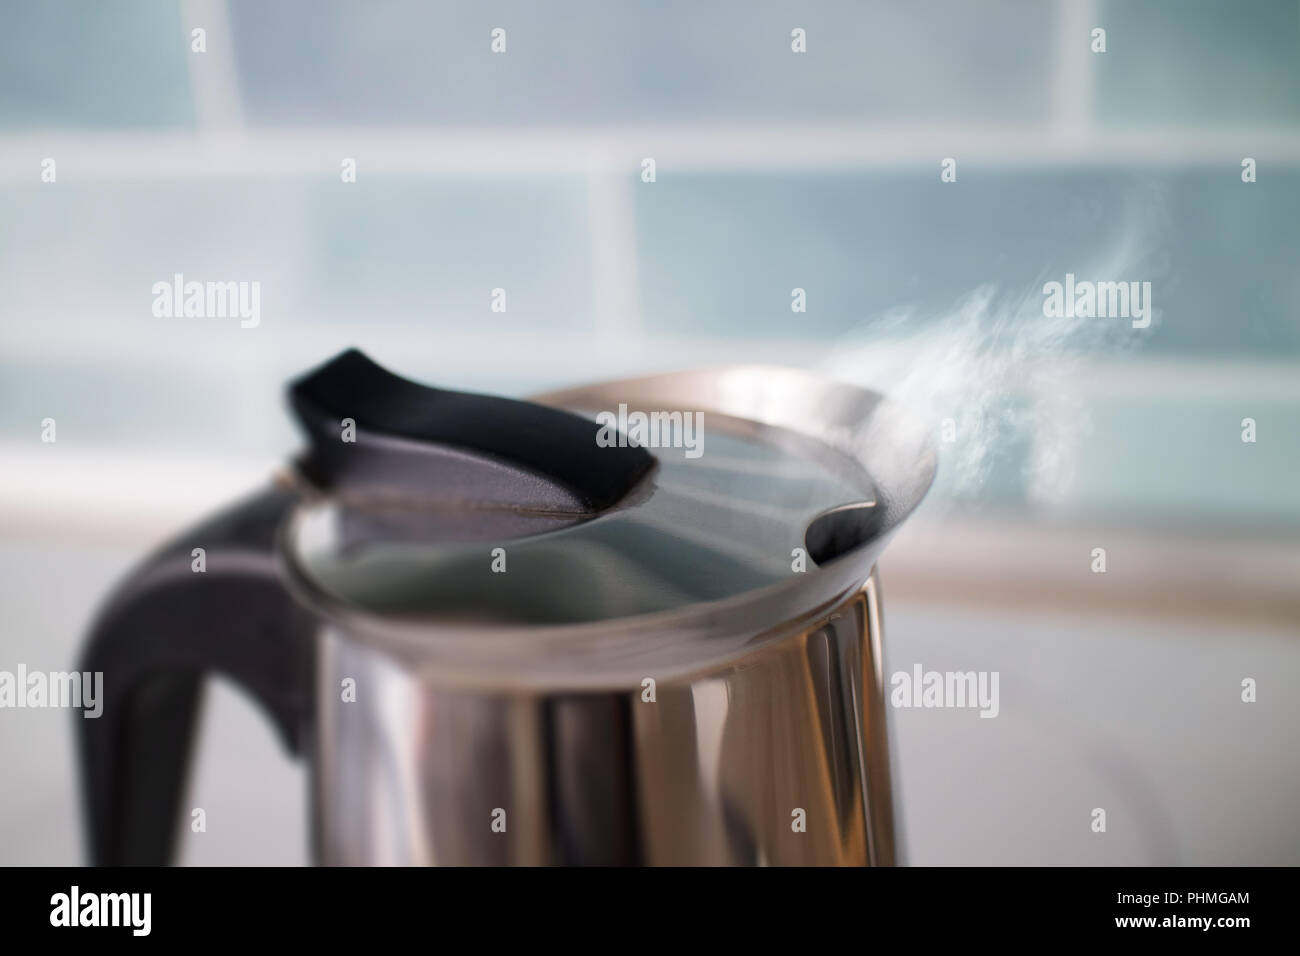 https://c8.alamy.com/comp/PHMGAM/kettle-with-boiling-hot-steaming-drinking-water-and-steam-PHMGAM.jpg